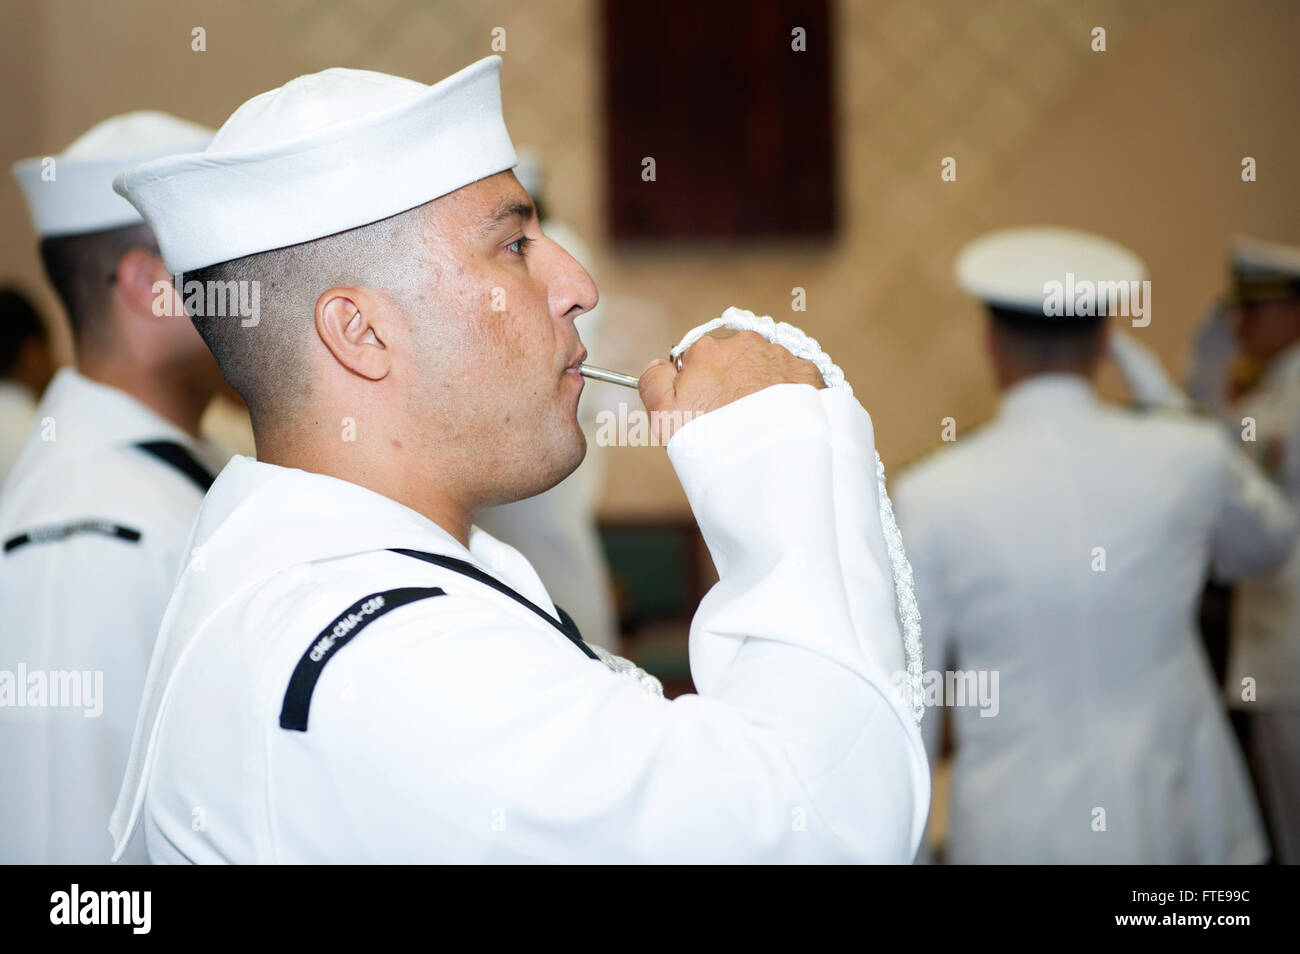 150717-N-YQ852-010 NAPLES, Italy (July 17, 2015) Yeoman 1st Class Alfredo Barros, from Cartagena, Colombia, pipes aboard a distinguished guest during a change of command ceremony for Commander, Task Force 69, Capt. Marc Stern at Naval Support Activity Naples, Italy, July 17, 2015. Capt. Marc Stern turned over command to Capt. Anthony Carullo. . U.S. 6th Fleet, headquartered in Naples, Italy, conducts the full spectrum of joint and naval operations, often in concert with allied, joint, and interagency partners, in order to advance U.S. national interests and security and stability in Europe and Stock Photo